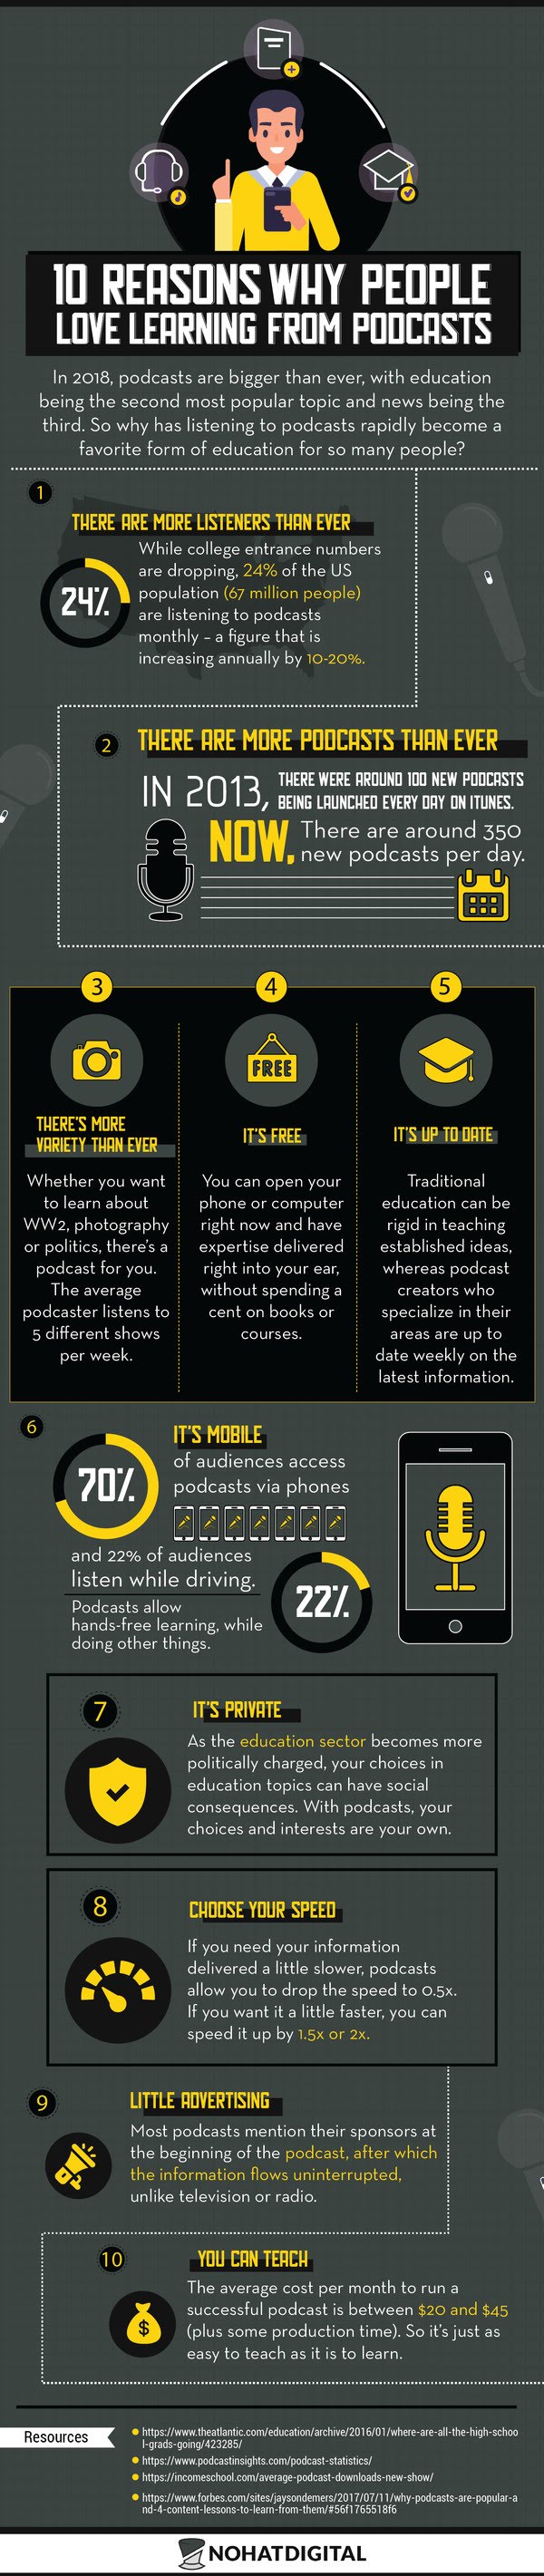 Why Podcast Popularity is Increasing Day-by-Day #infographic